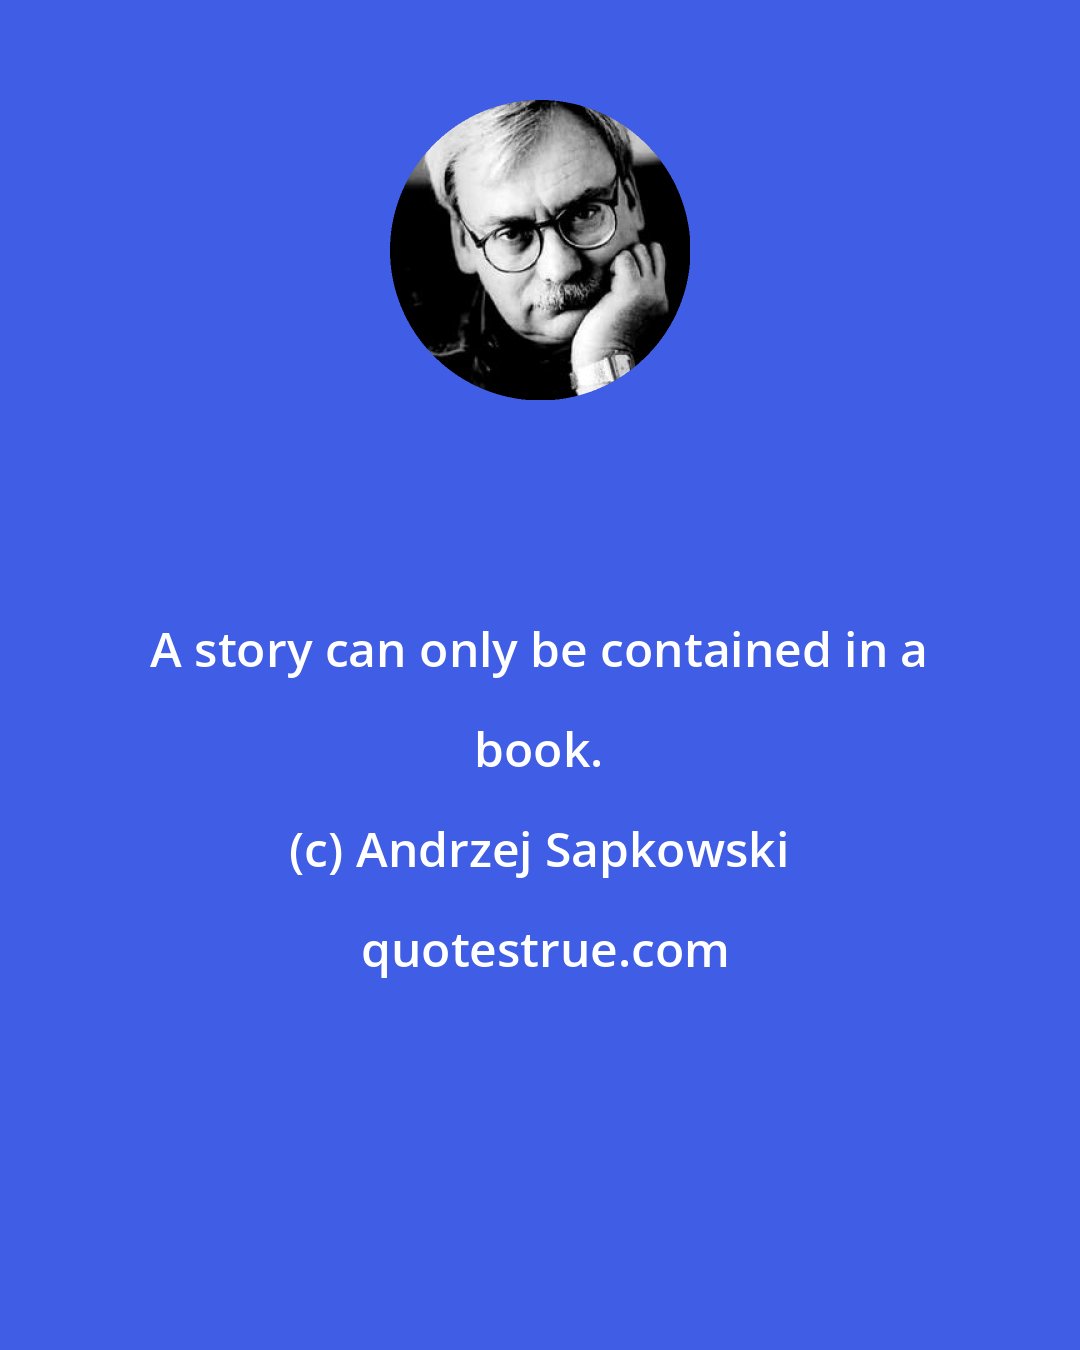 Andrzej Sapkowski: A story can only be contained in a book.